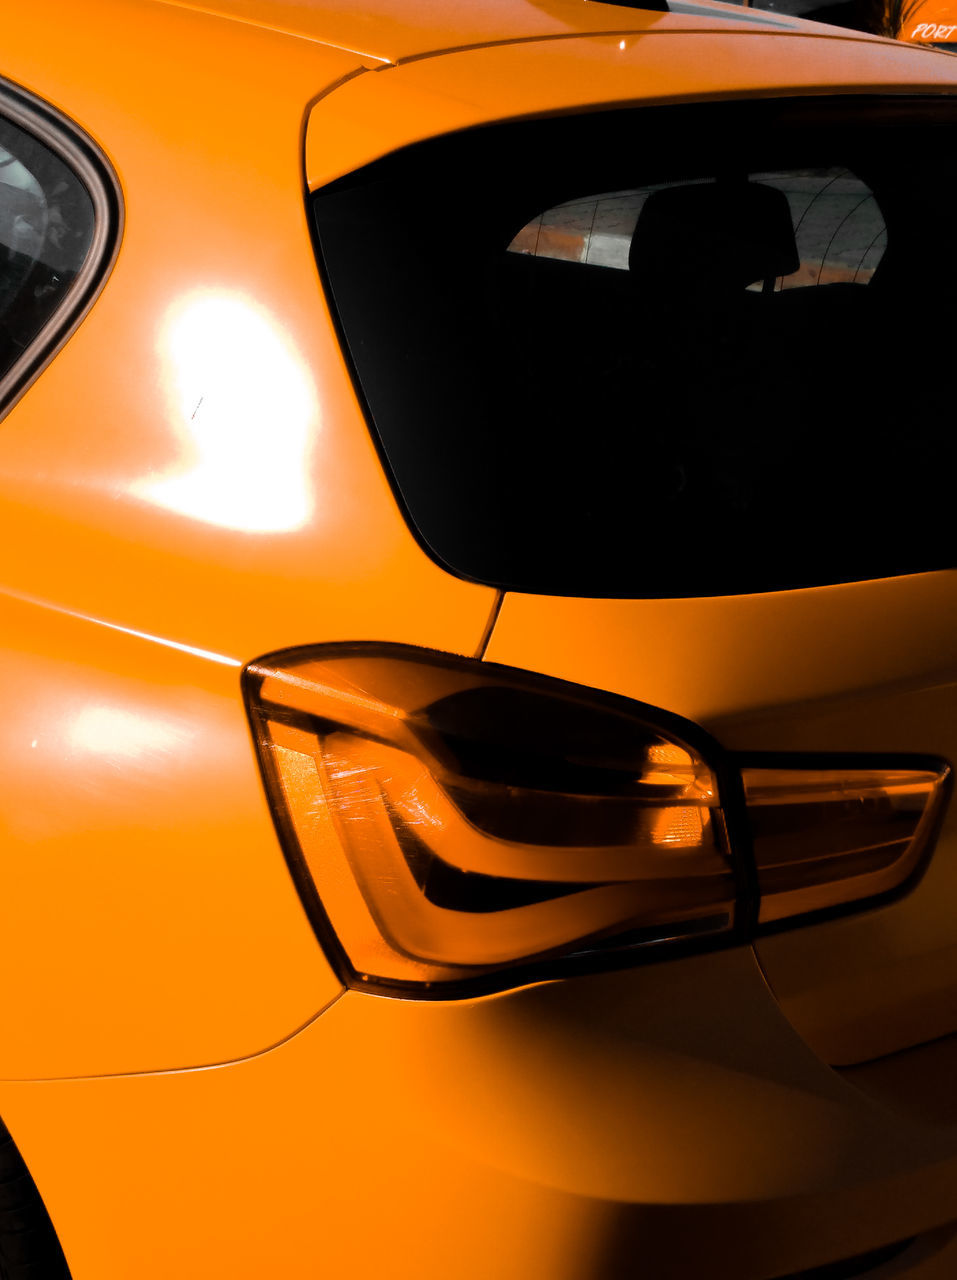 car, mode of transportation, motor vehicle, land vehicle, transportation, close-up, orange color, no people, reflection, glass - material, outdoors, sunset, yellow, headlight, travel, side-view mirror, stationary, transparent, vehicle interior, luxury